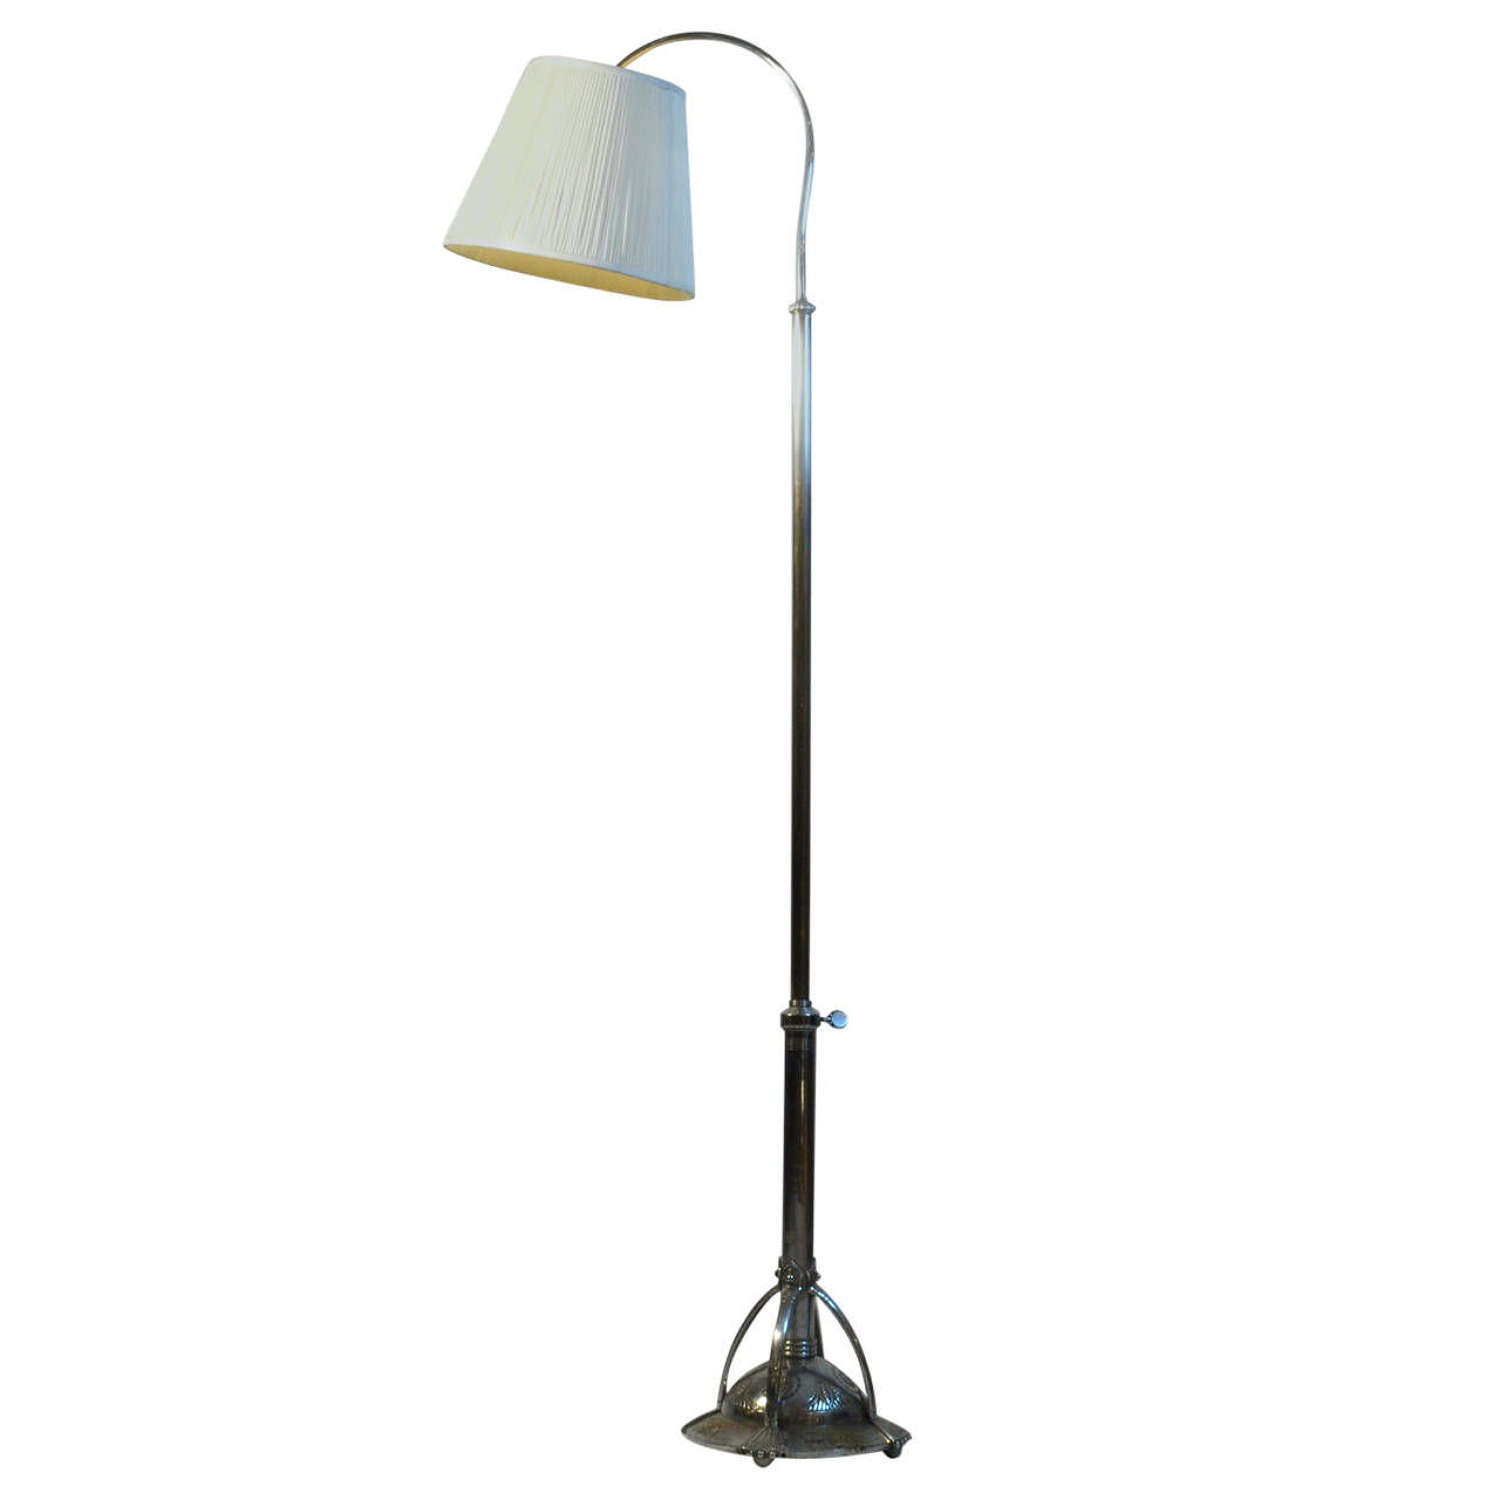 Art Deco Floor Lamp with Pleated Lamp Shade